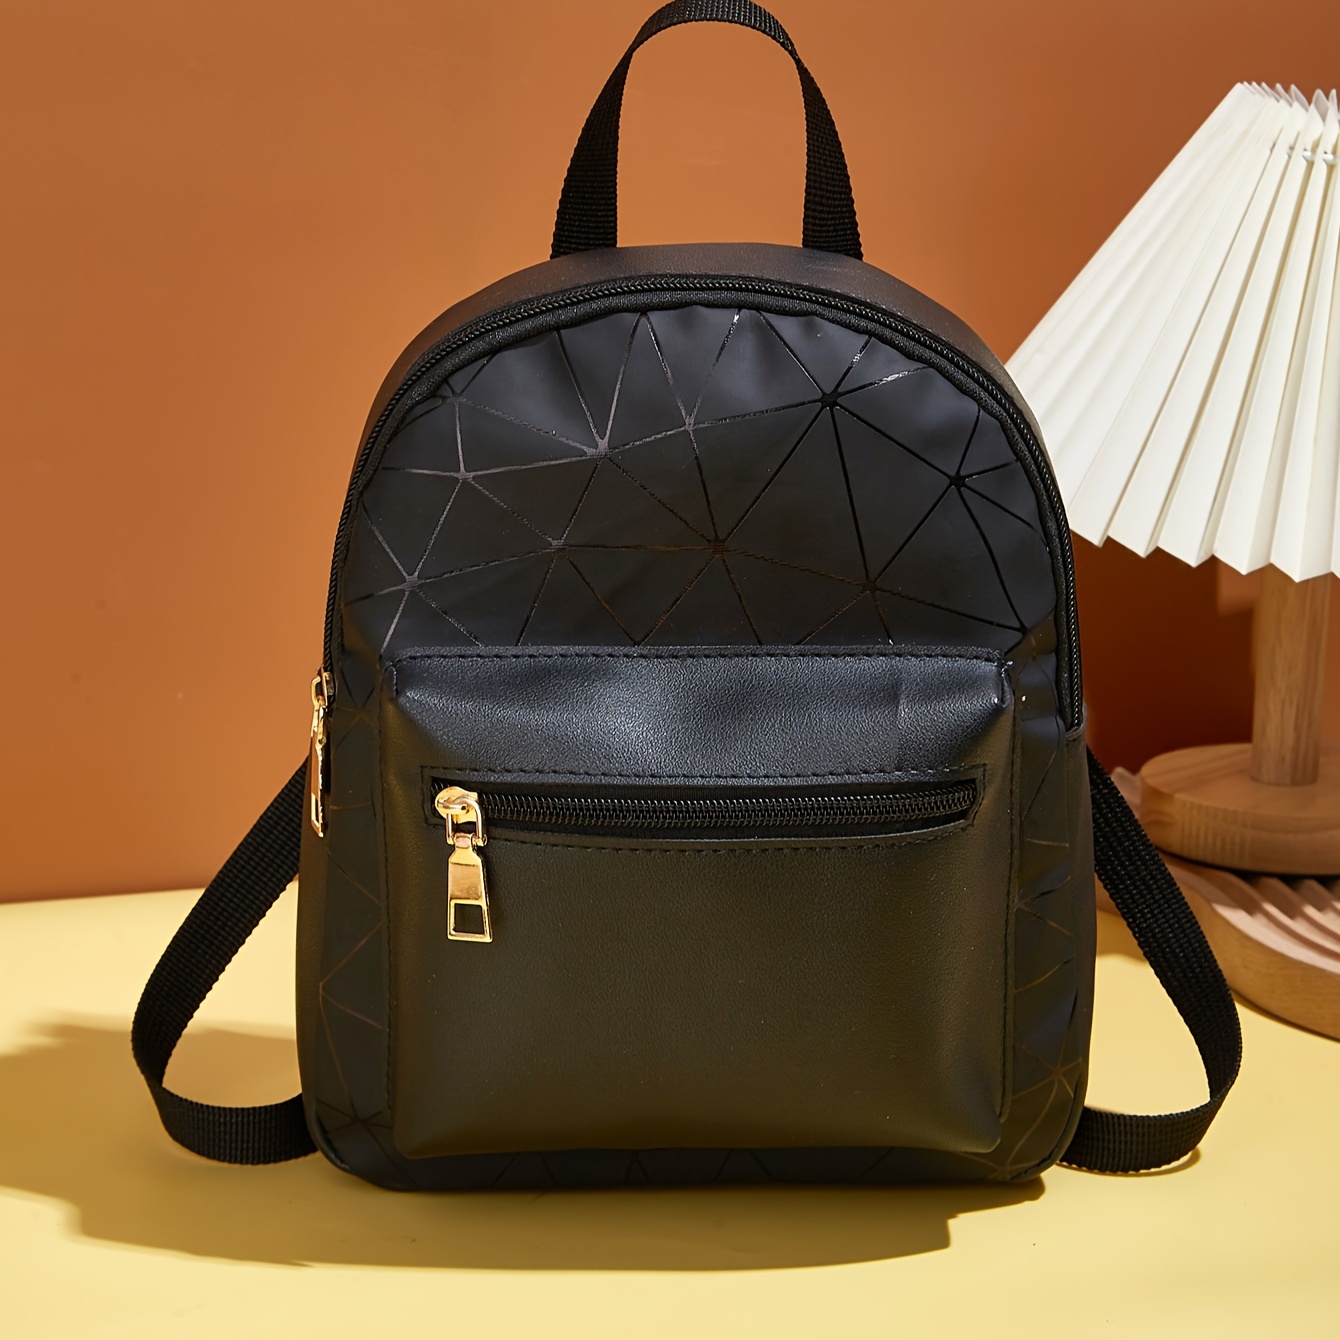 

Mini Geometric Backpack For Women, Casual Fashion Shoulder Bag, Practical Trendy Bookbag With Durable Pu Material